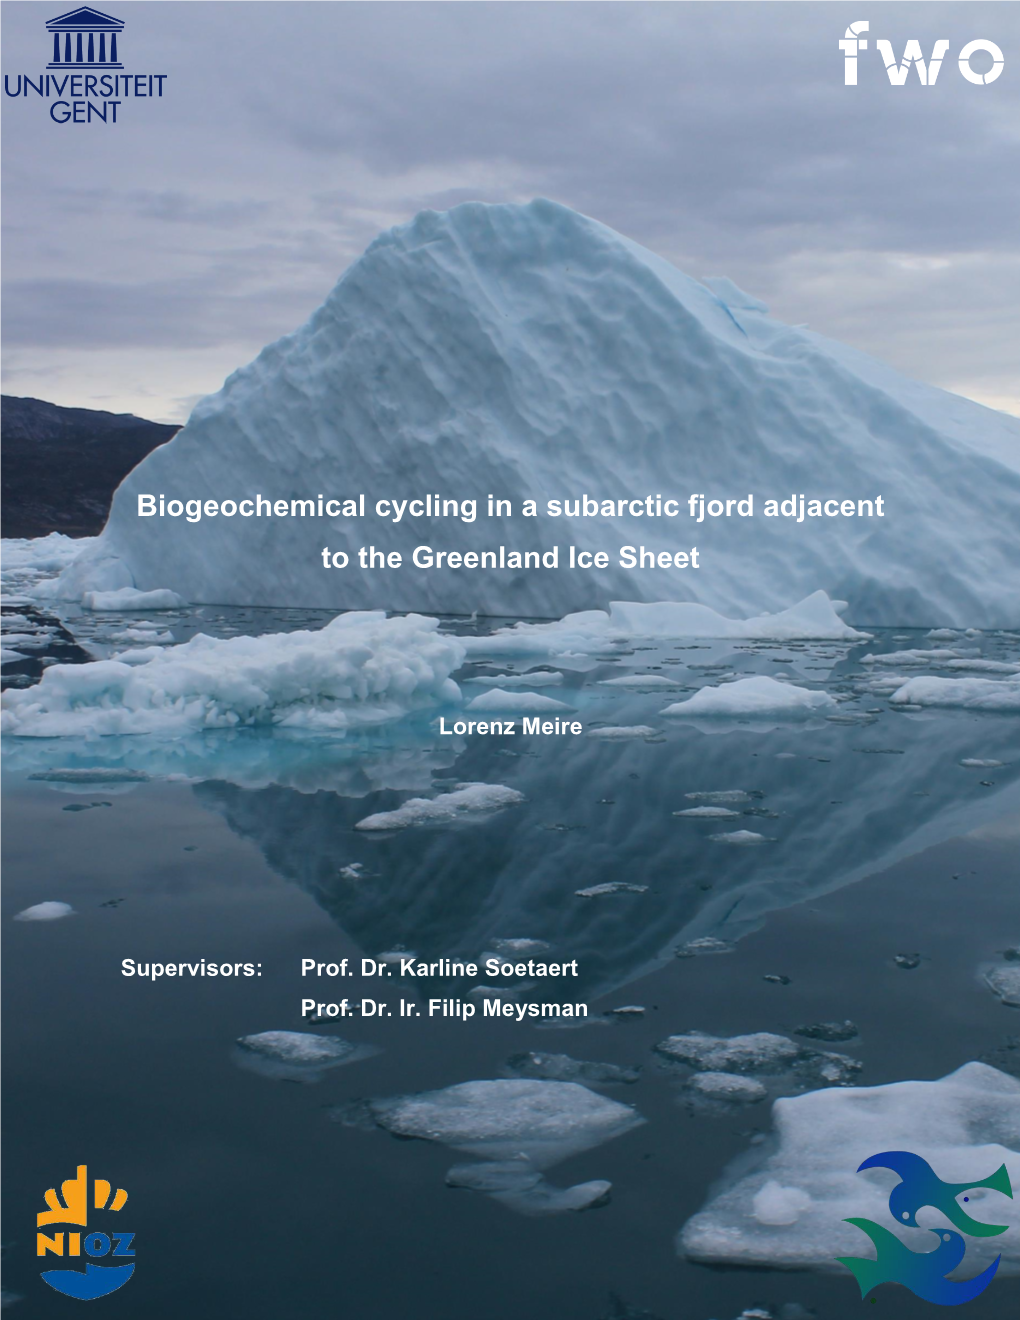 Biogeochemical Cycling in a Subarctic Fjord Adjacent to the Greenland Ice Sheet